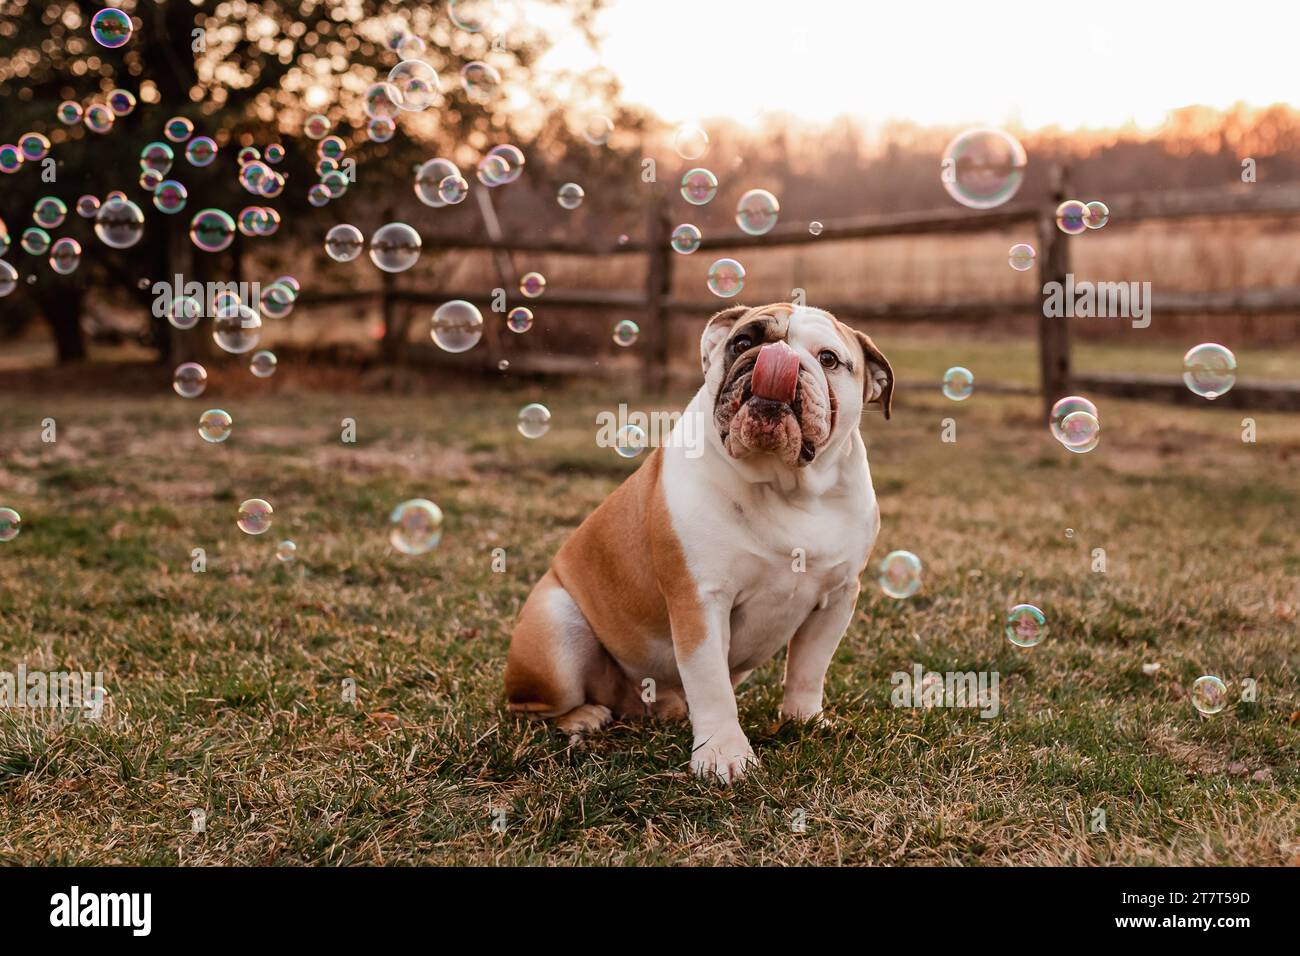 English Bulldog with Tongue Out at Sunset Surrounded by Bubbles Stock Photo